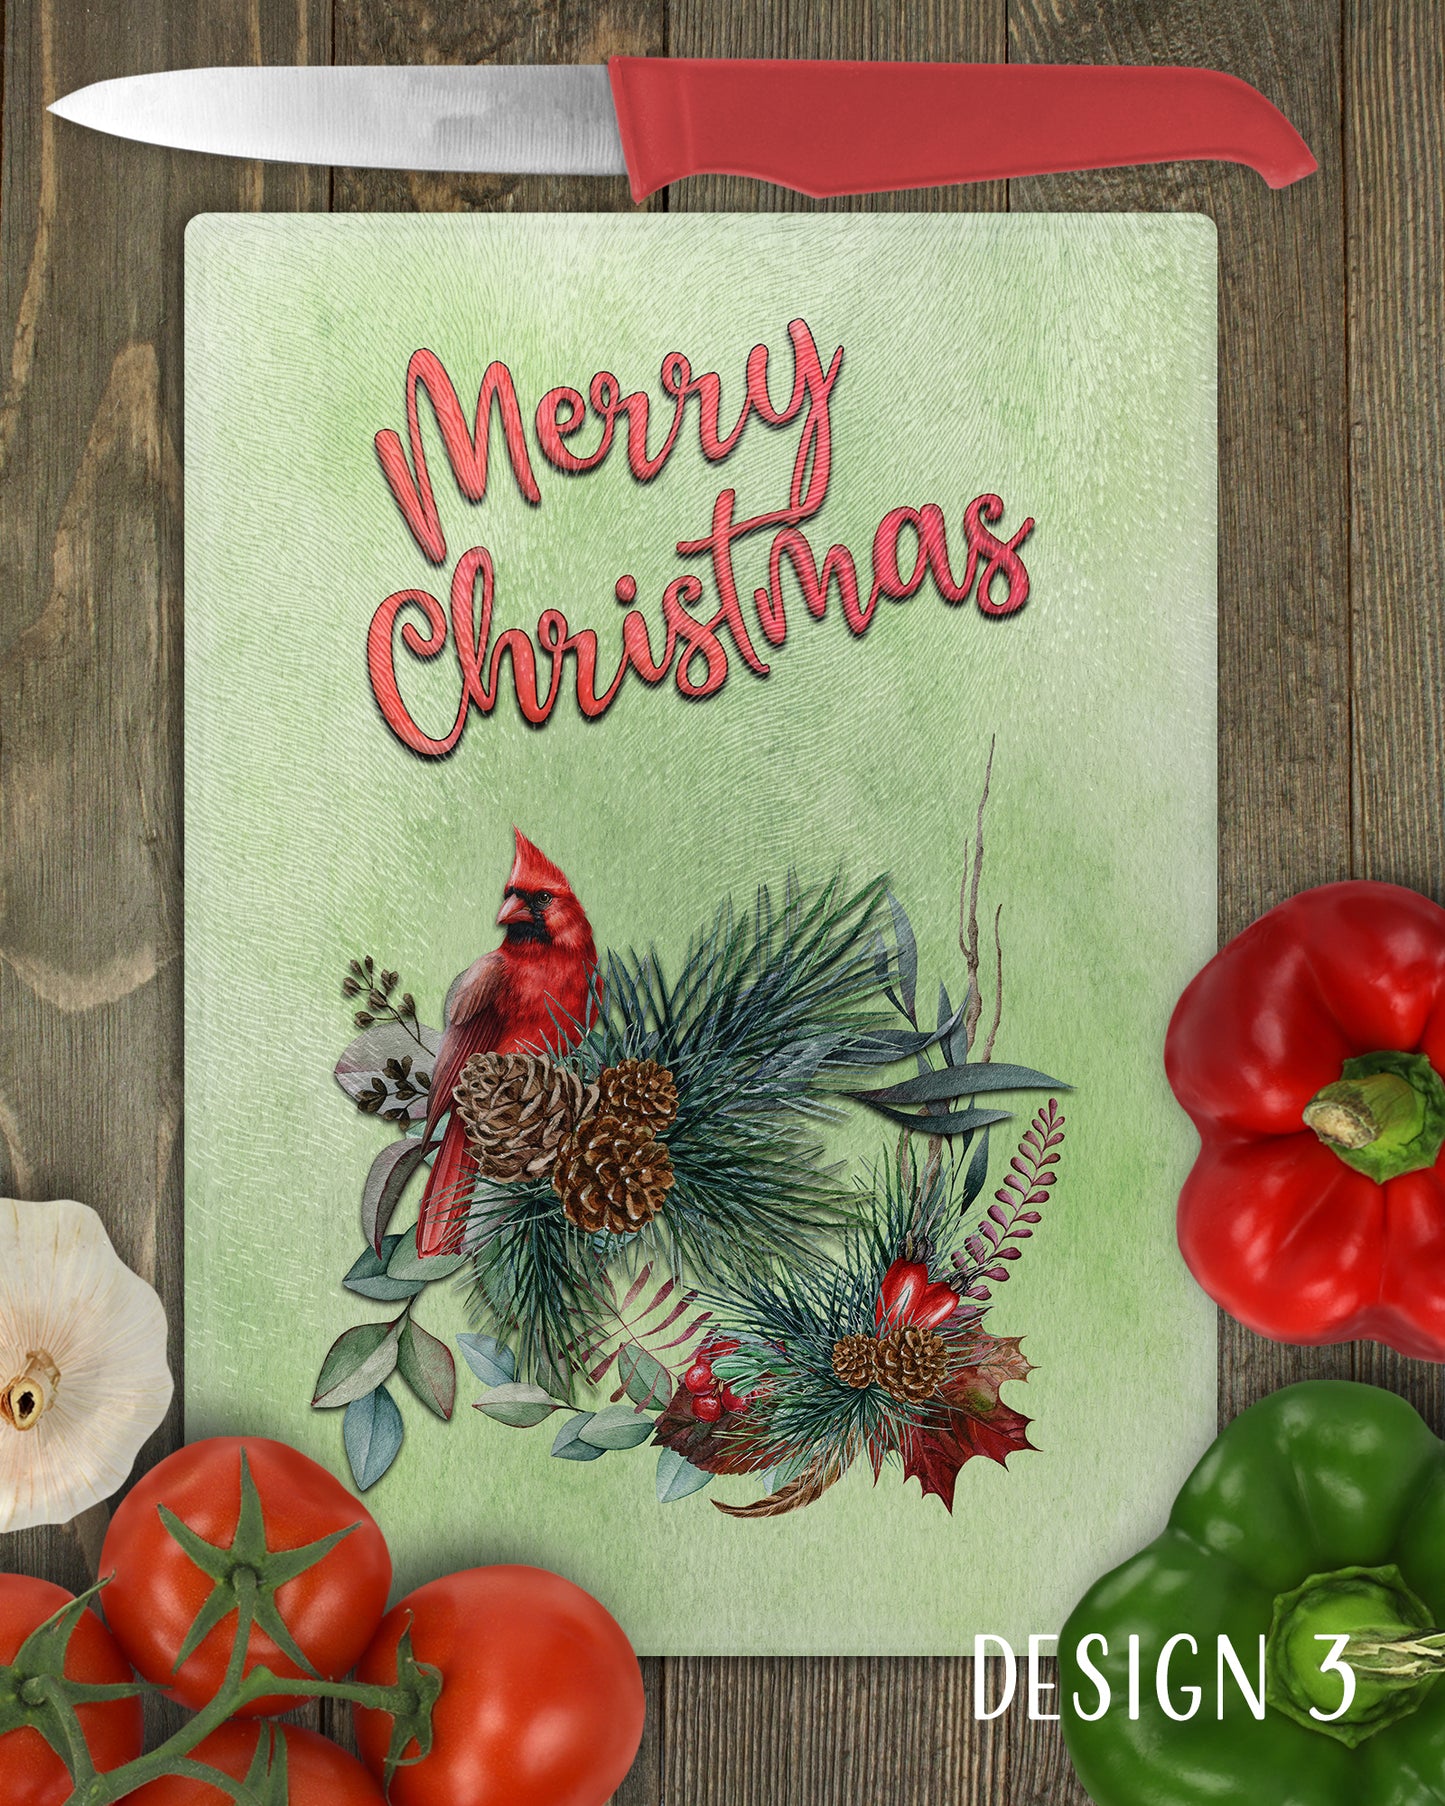 Christmas Cardinals Art Decorative Glass Cutting Board - 3 Designs to chose from